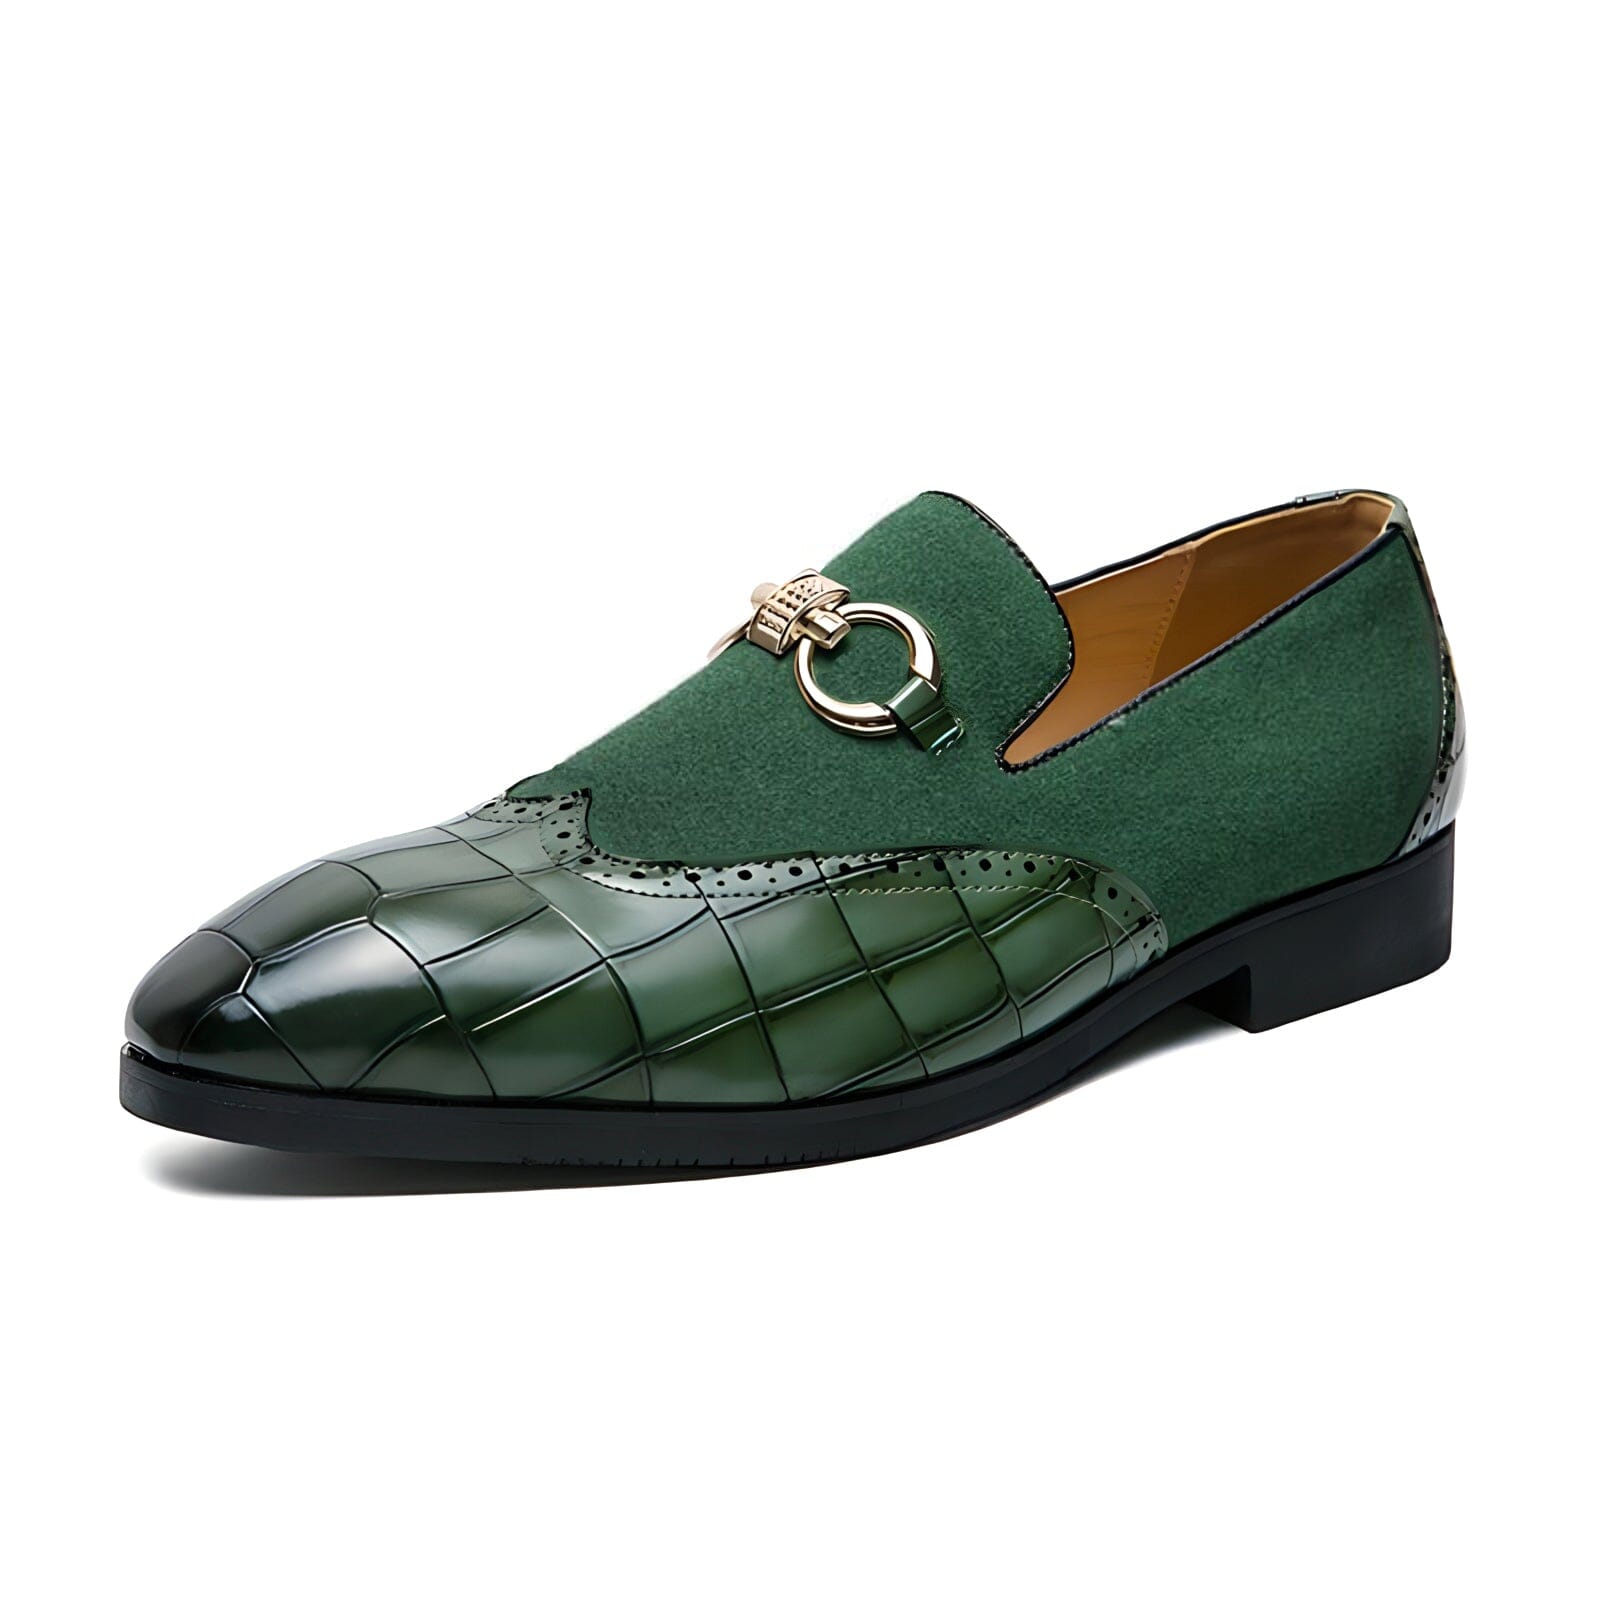 The Interlock Faux Croc Leather Suede Penny Loafers - Multiple Colors WD Styles Green US 5 / EU 38 